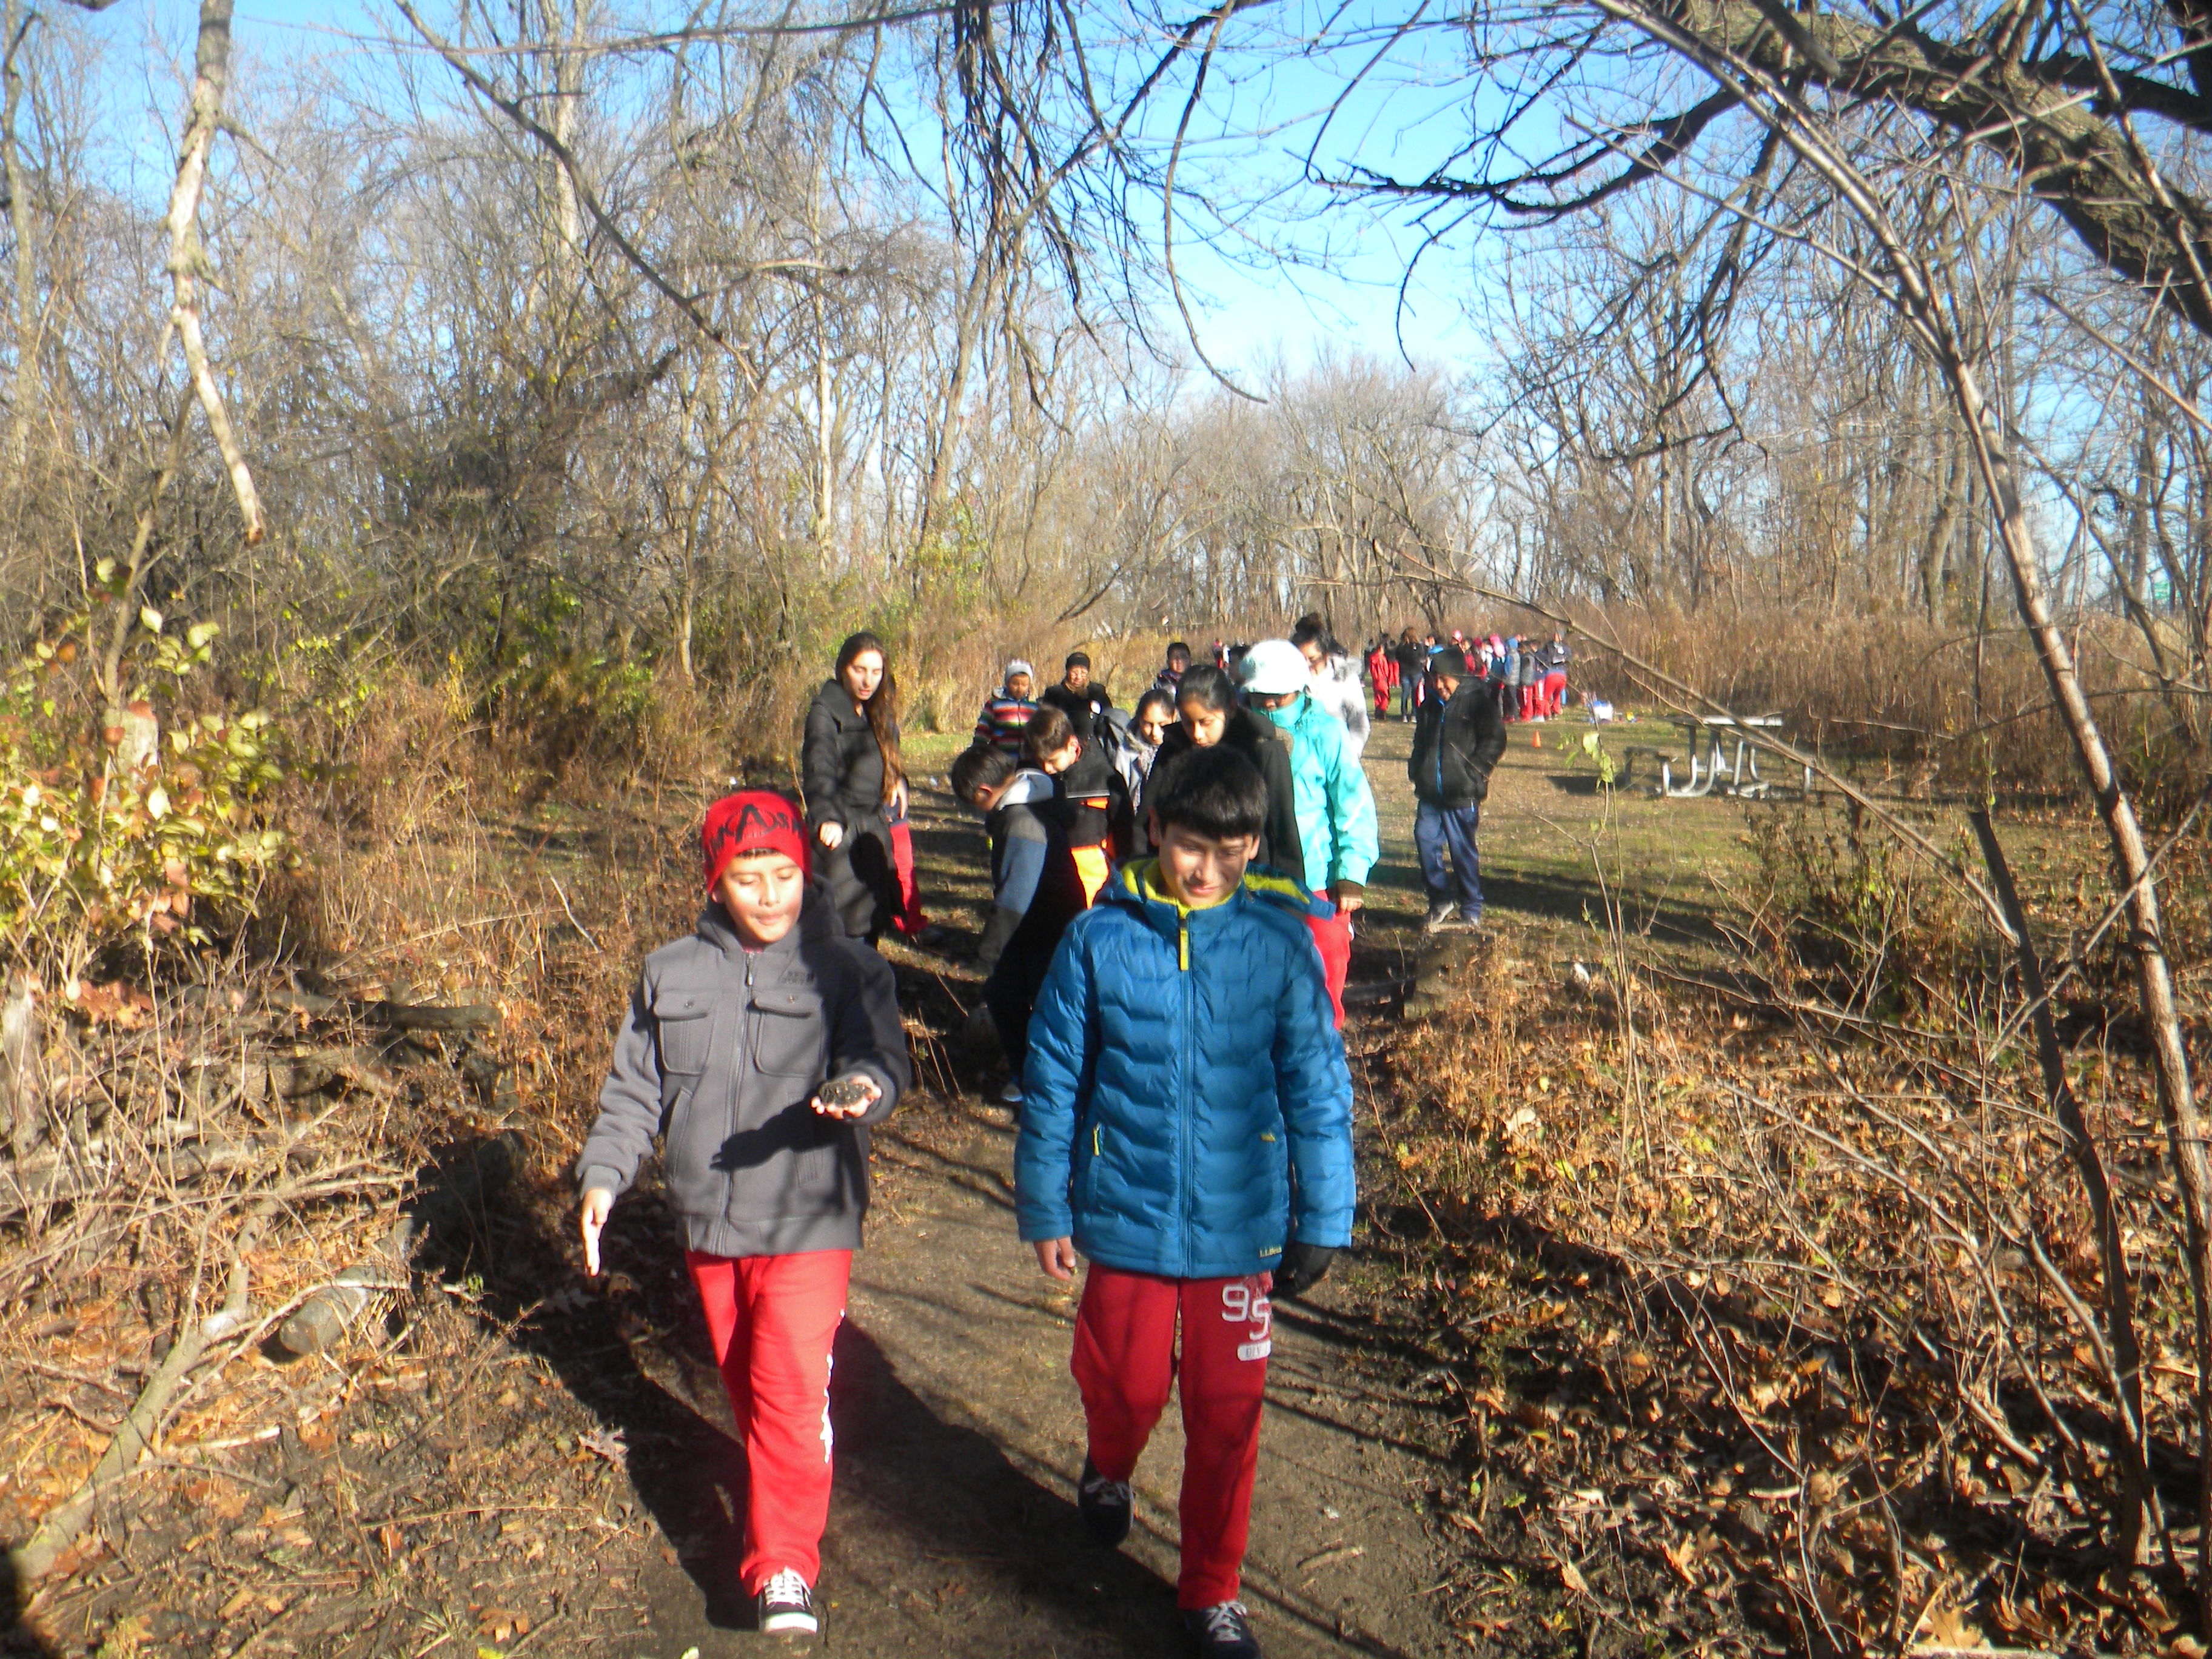 Fifth grade students begin their nature exploration hike during their Mighty Acorns field trip to Eggers Grove.